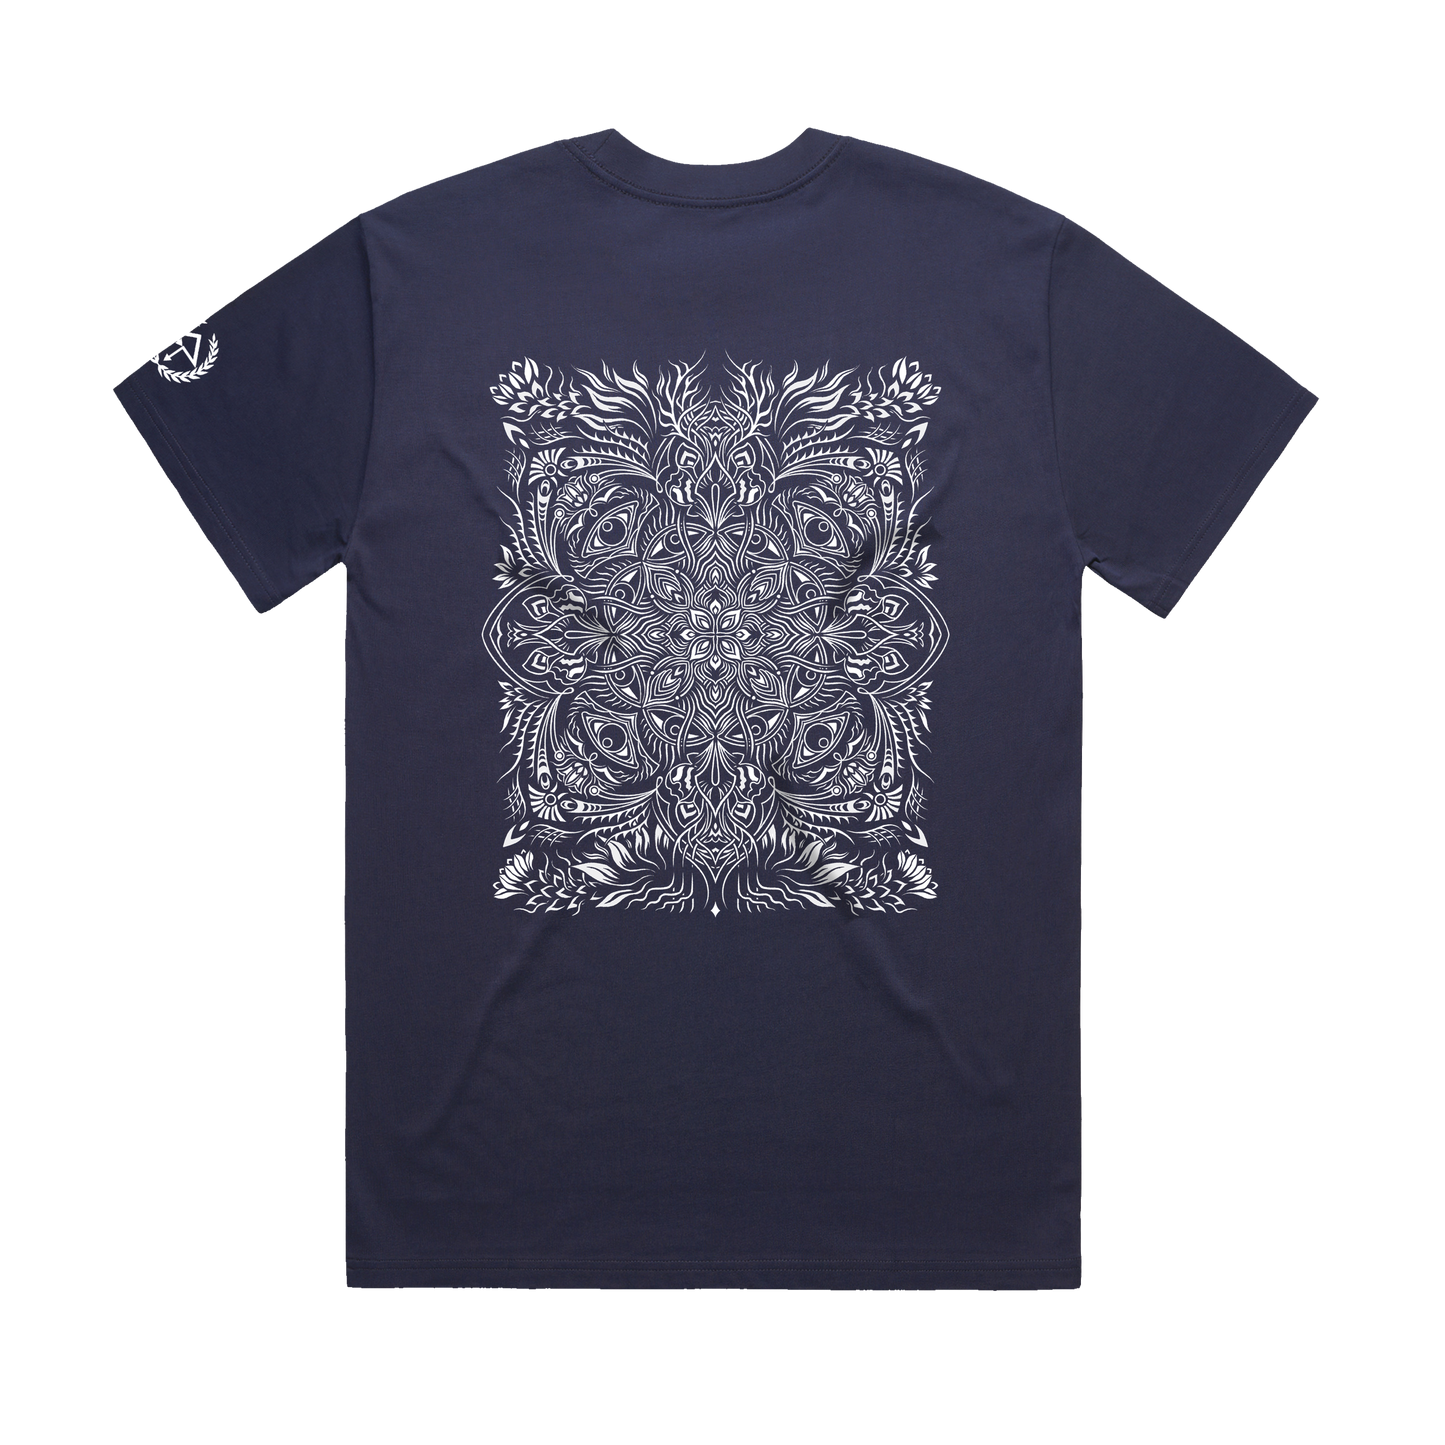 PRE SALE - Of The Trees - Heavyweight Tee - Midnight Blue